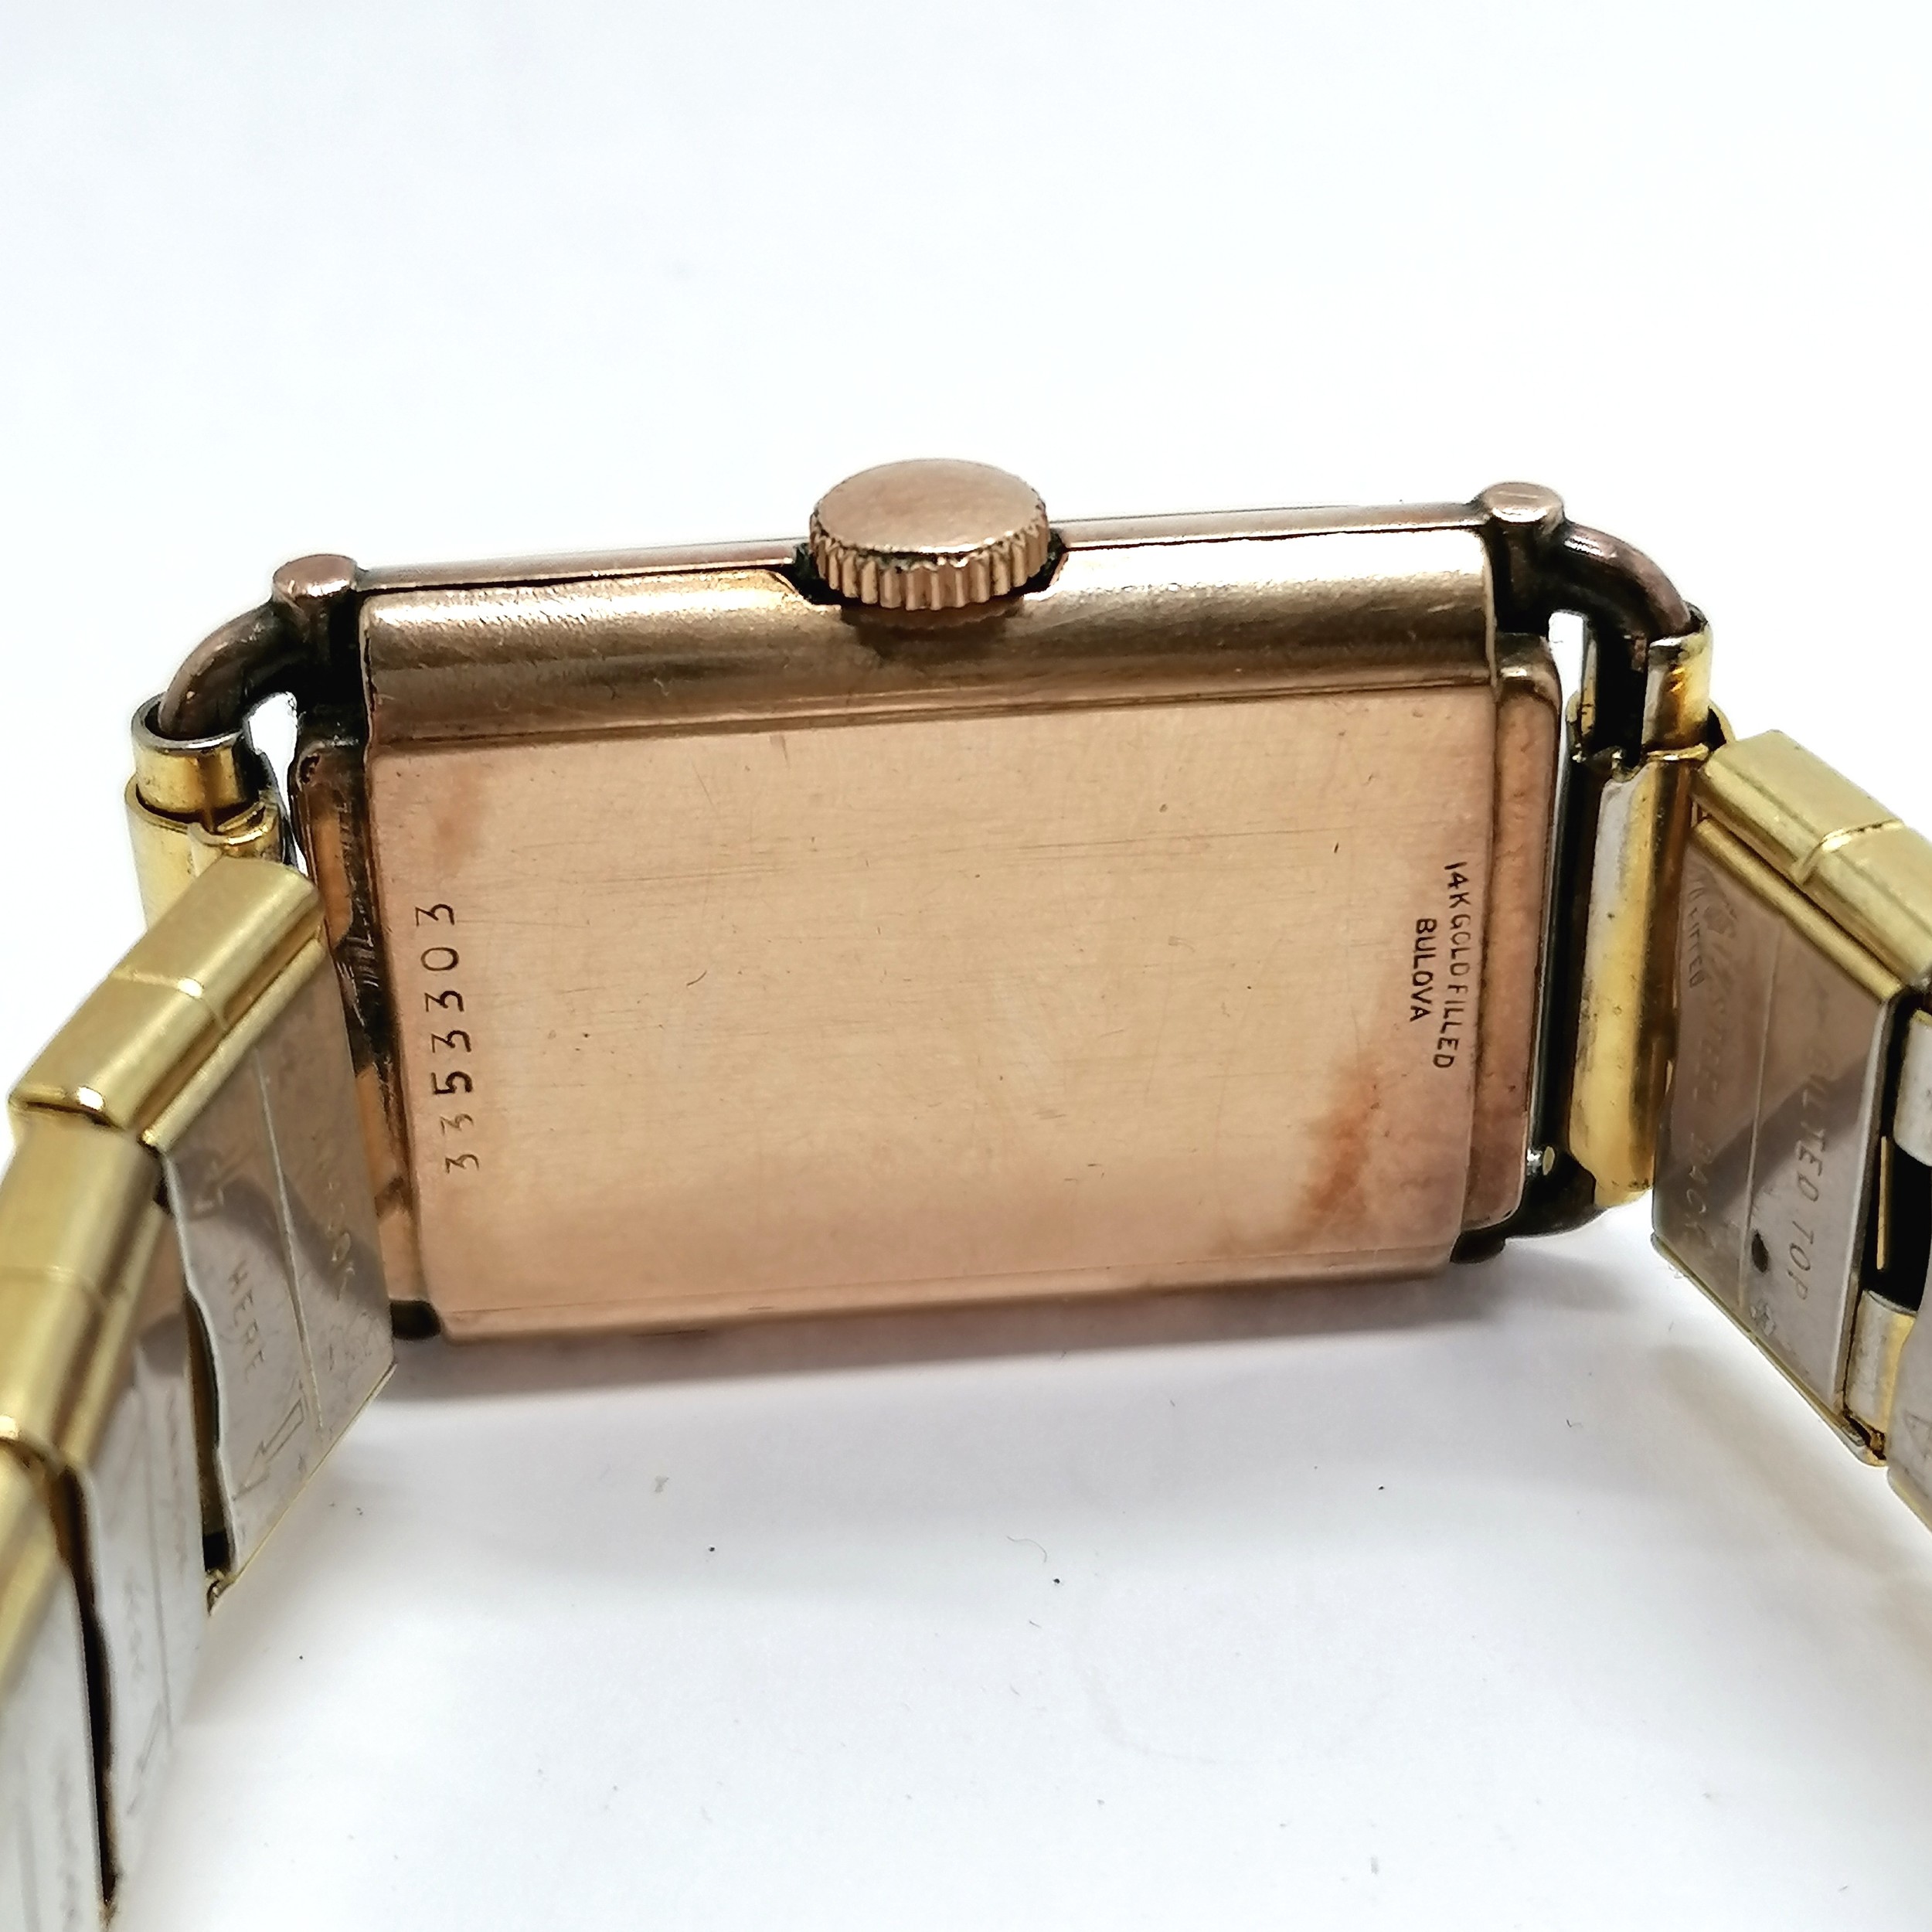 Bulova Art Deco manual wind wristwatch in a 14ct gold filled case on a sprung gold plated bracelet - - Image 3 of 3